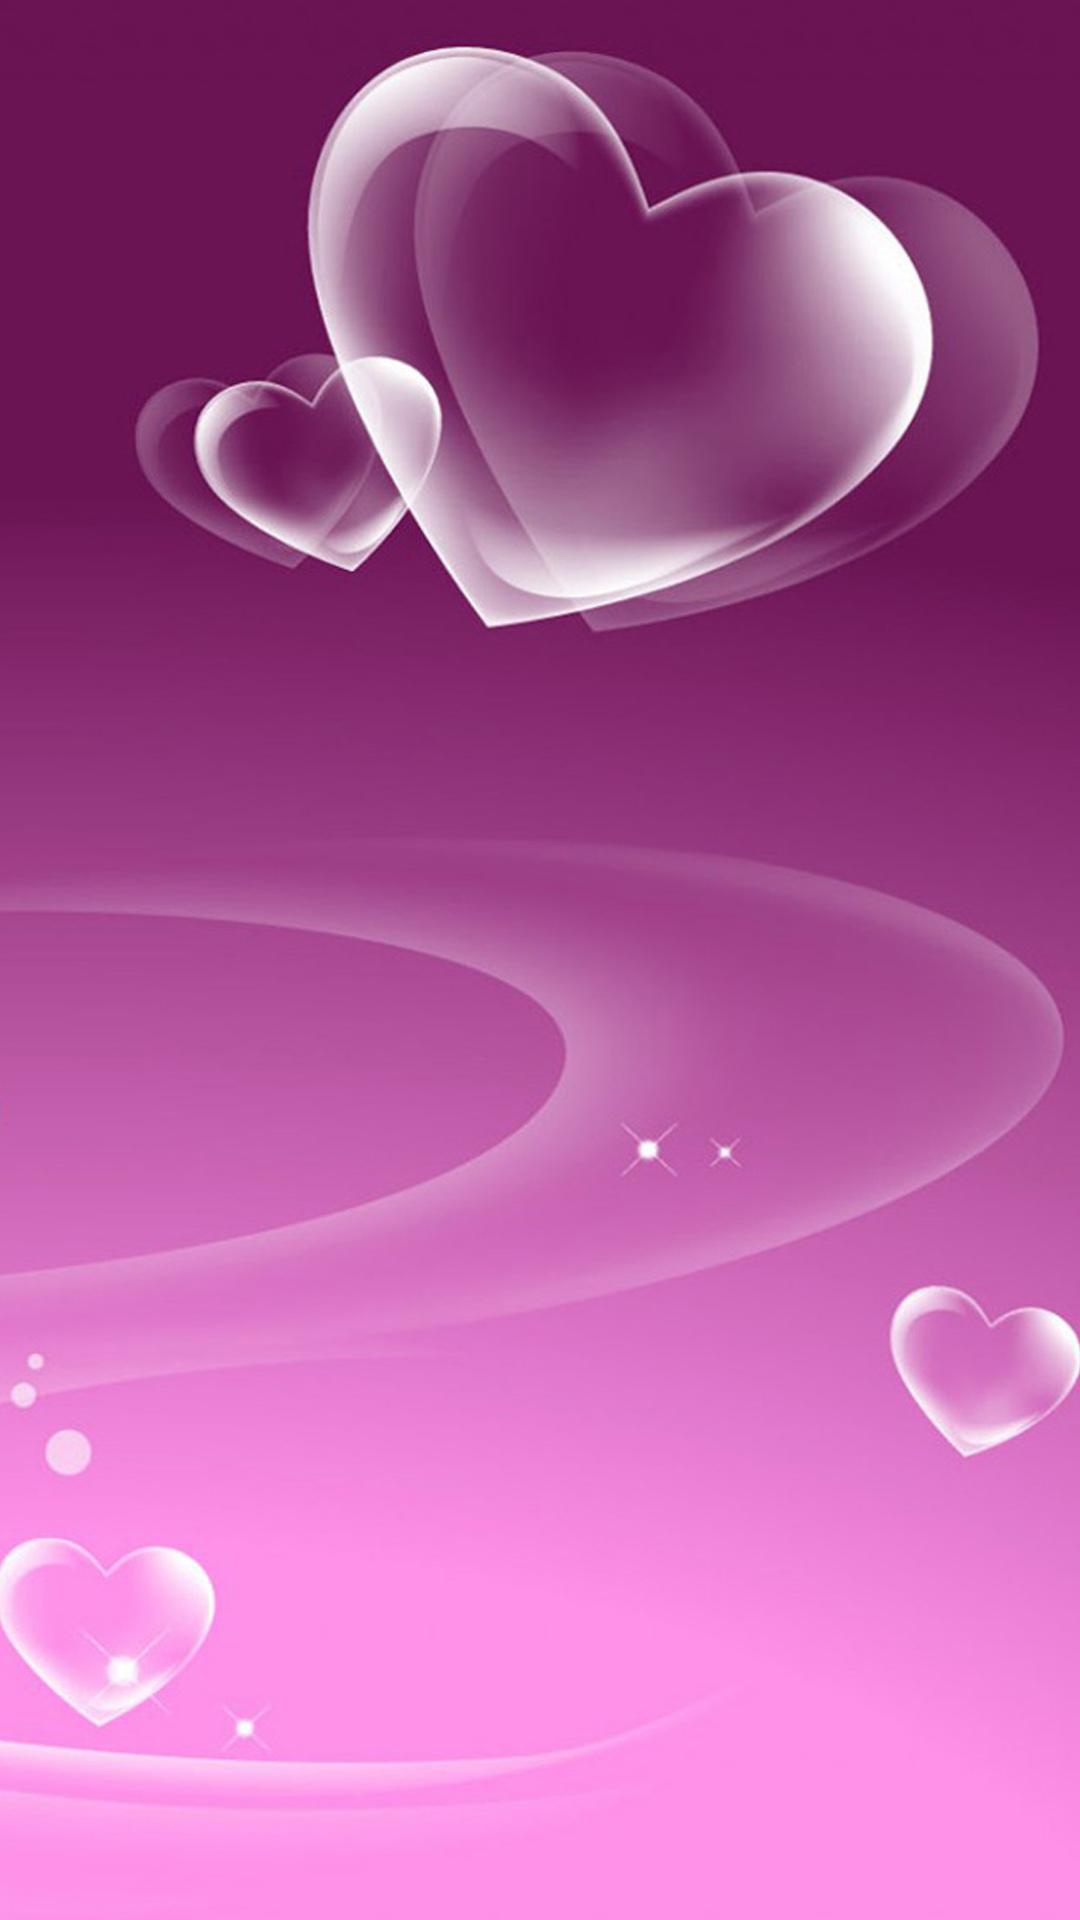 Romantic Love Wallpaper. Free Image Download For Android, Desktop